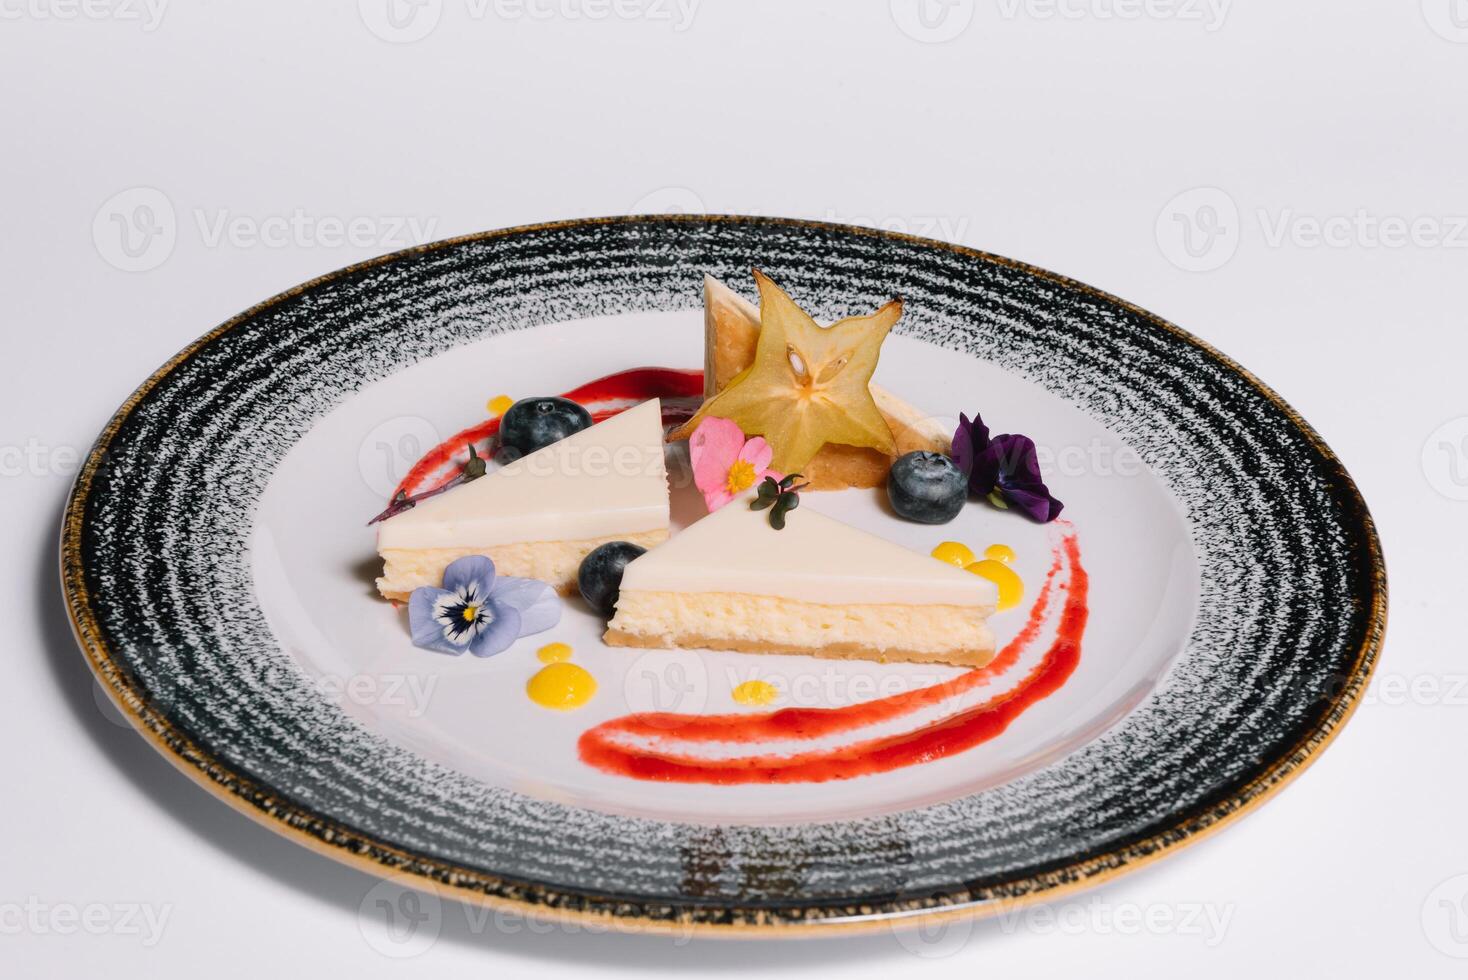 Cheesecake with jam and berries on a plate on a white background photo